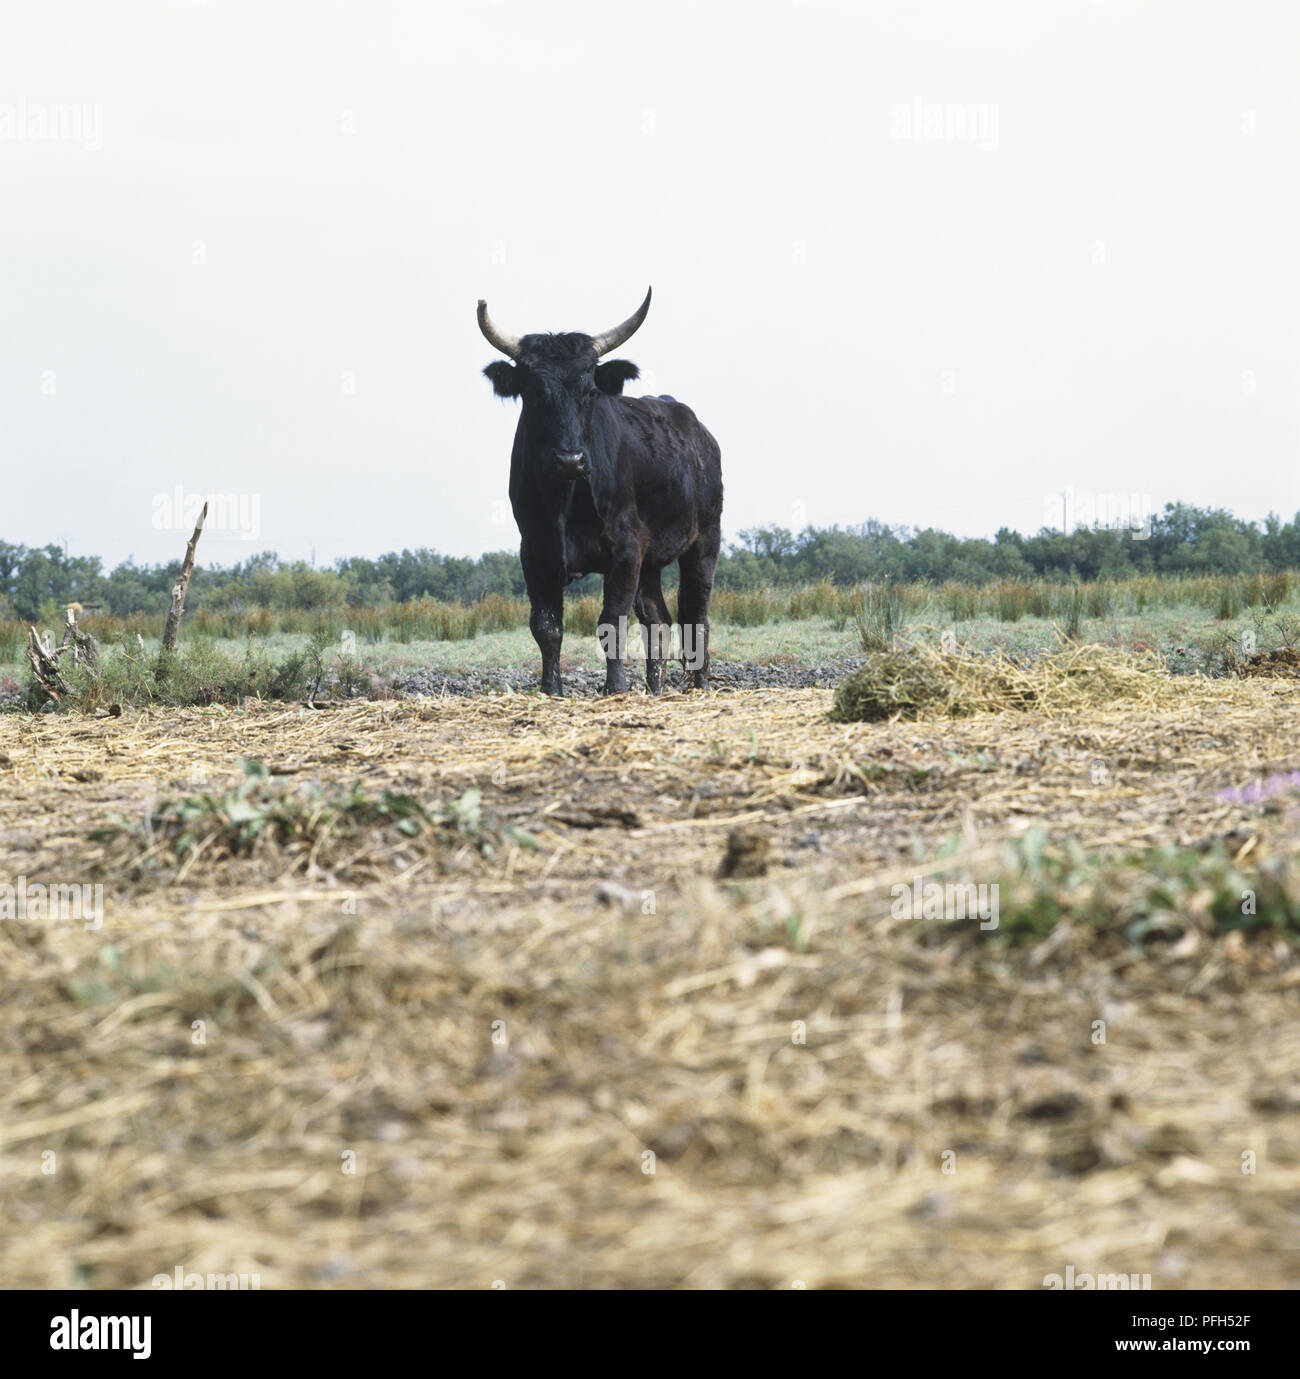 Camargue Bull (Bos taurus) in a field, front view Stock Photo